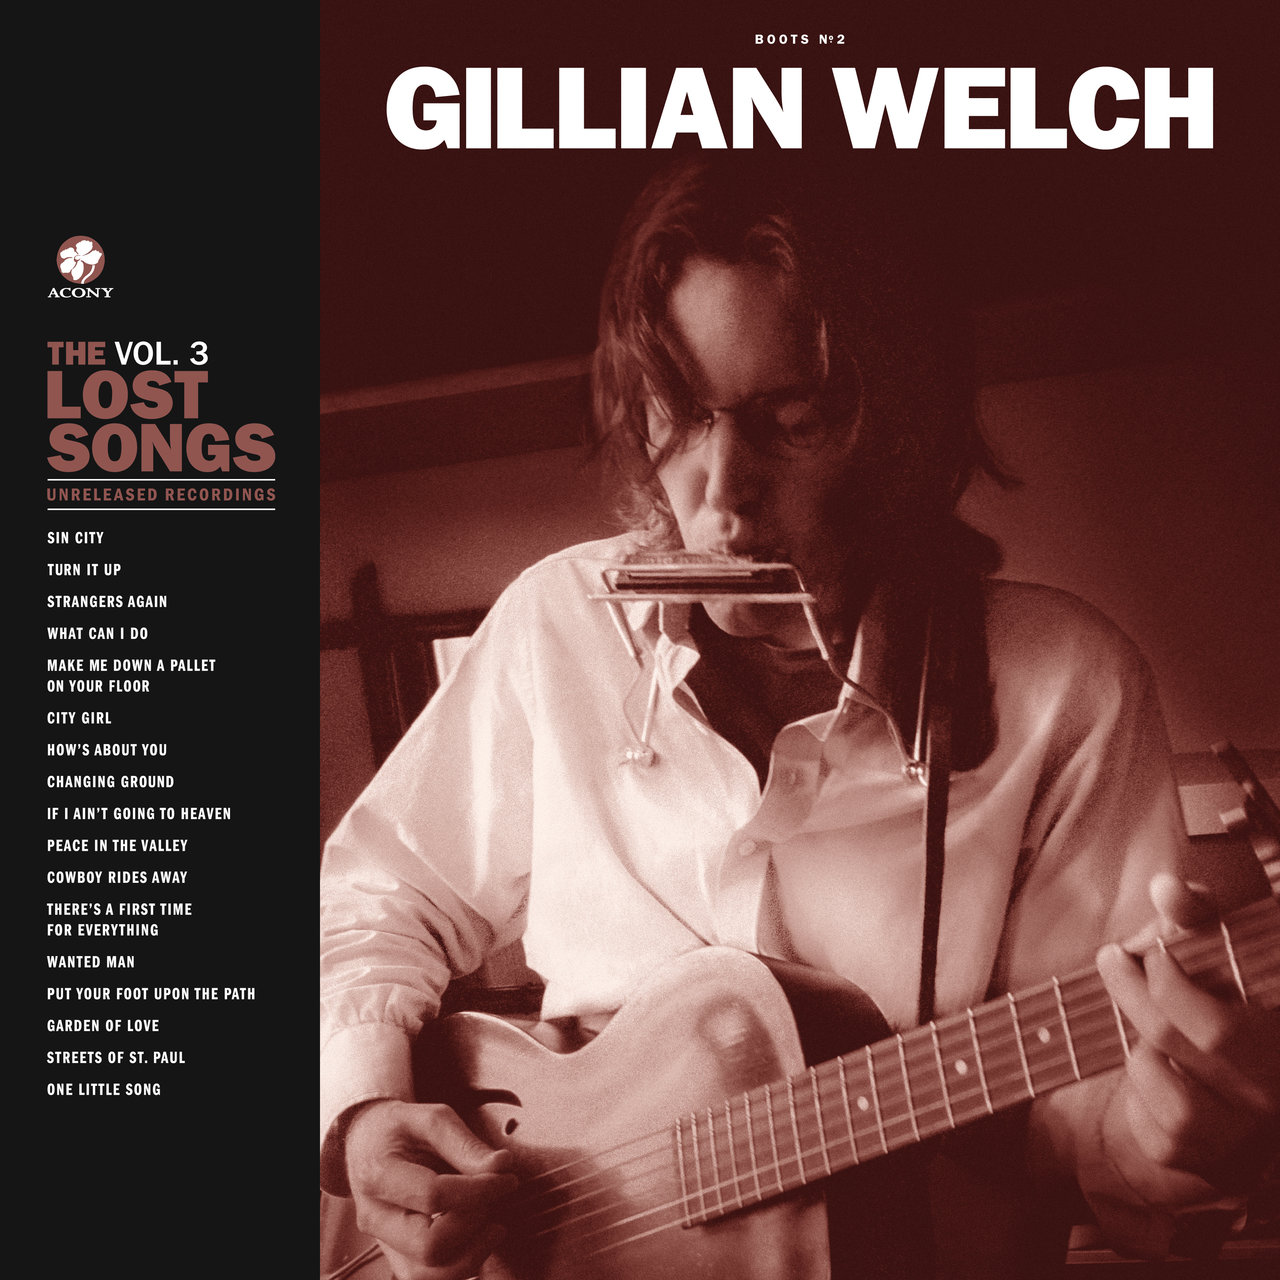 Gillian Welch – Boots No. 2 – The Lost Songs, Vol. 3 (2020) [FLAC 24bit/44,1kHz]